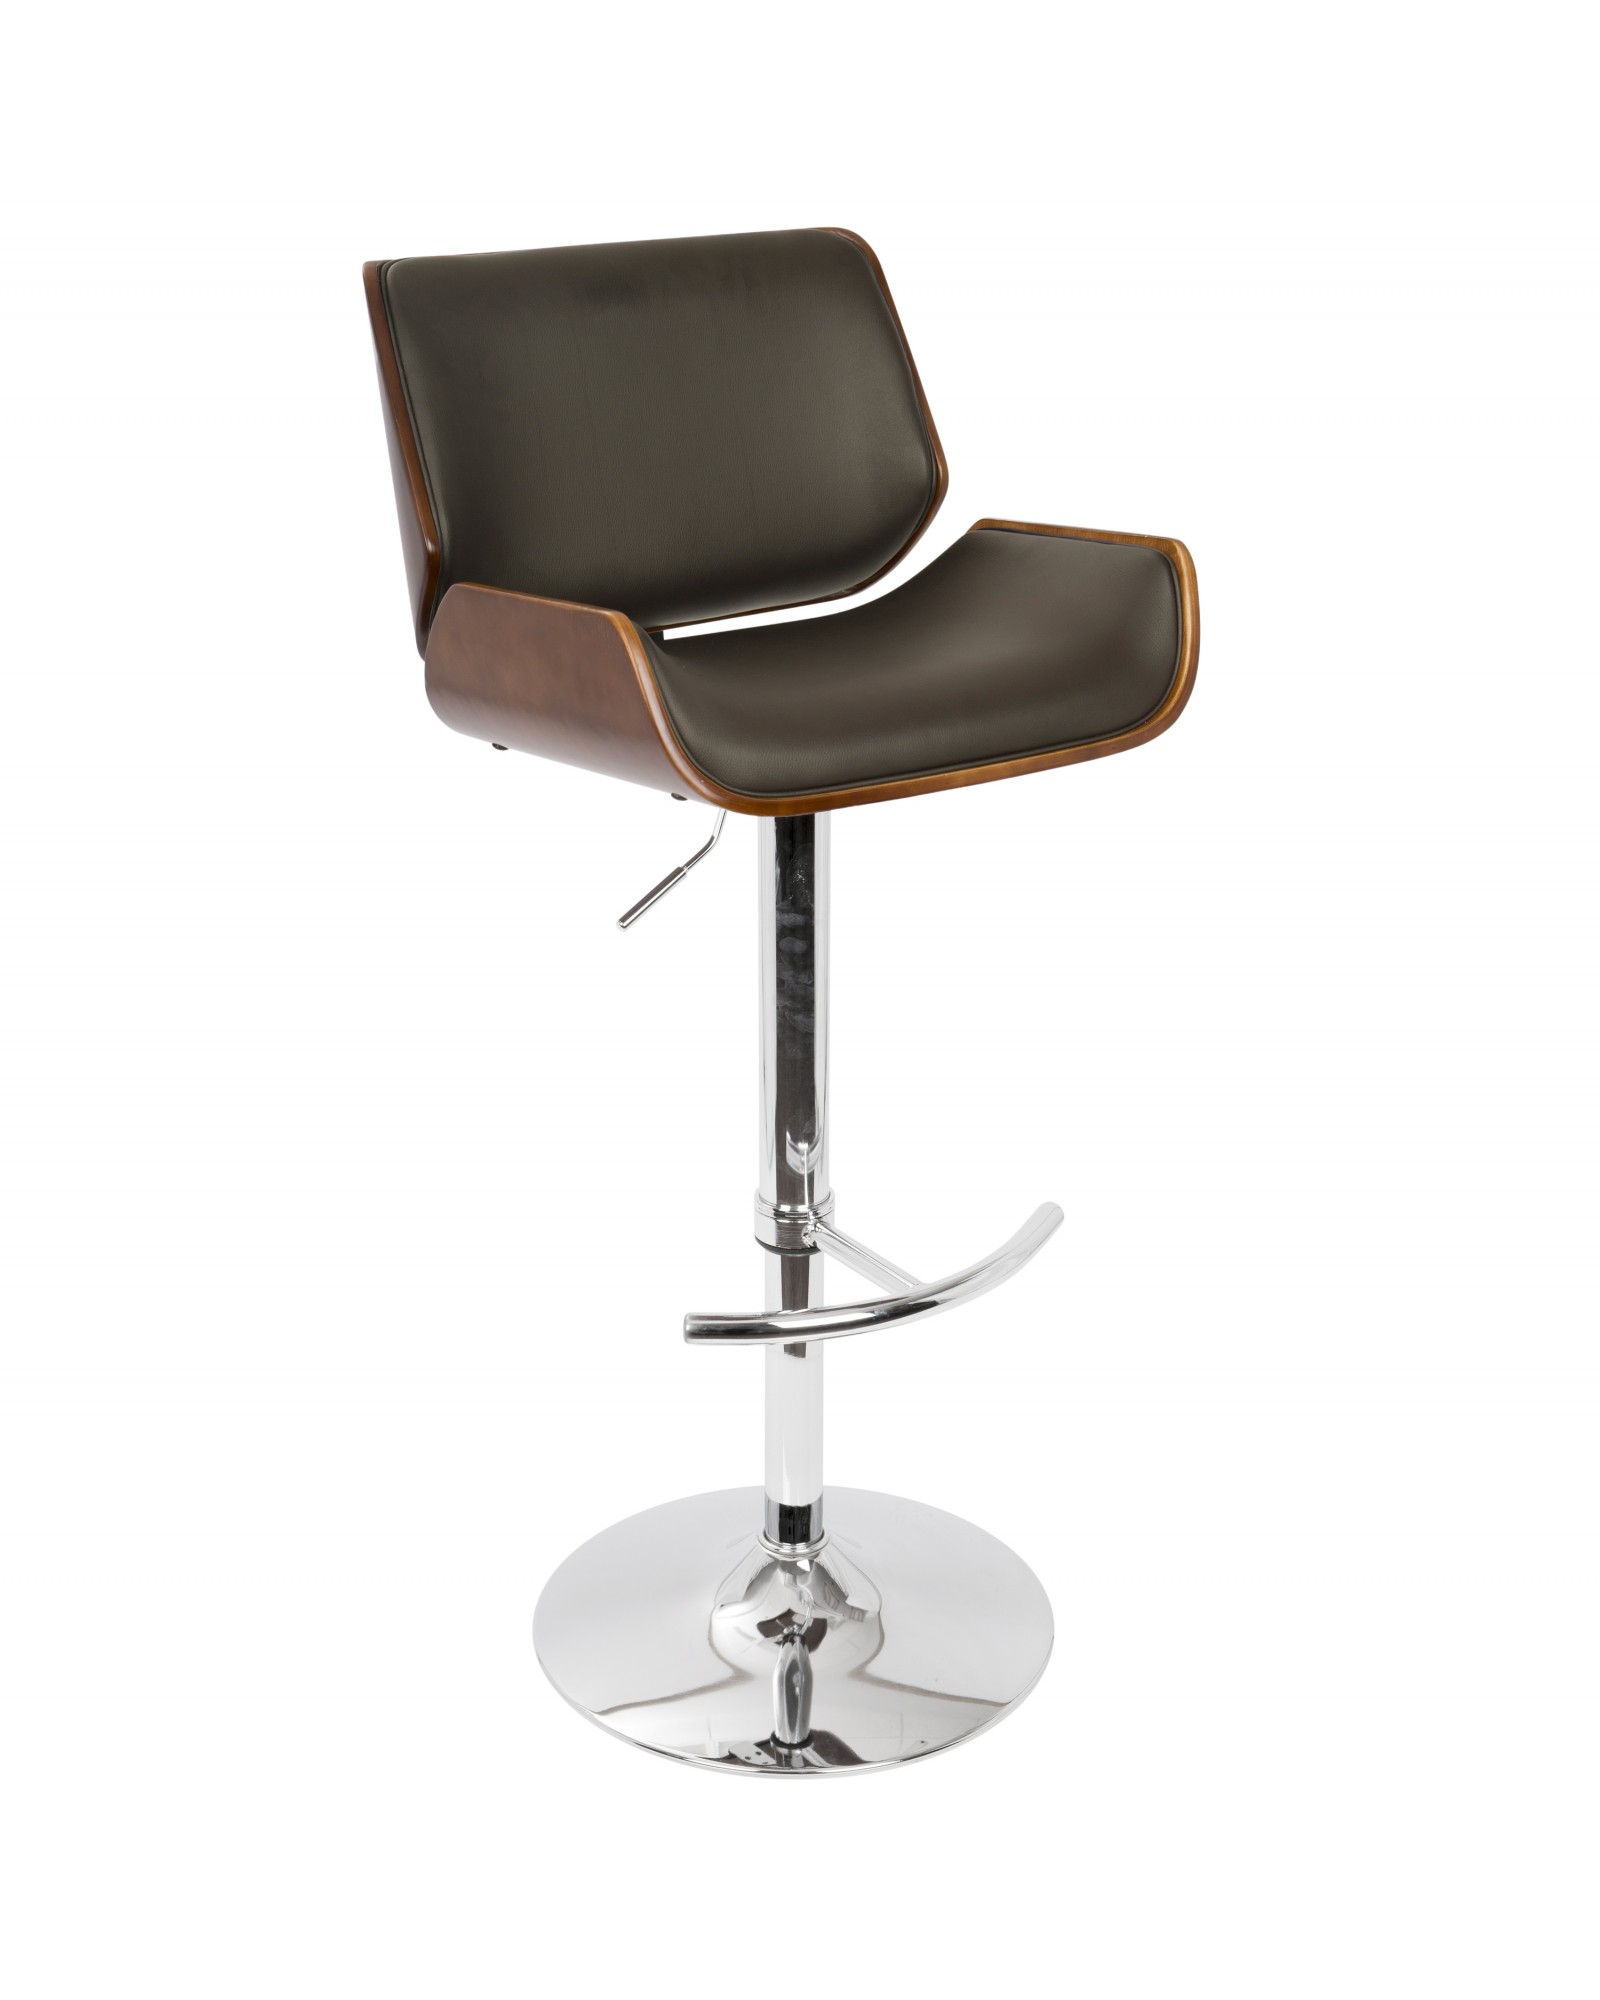 Santi Mid-Century Modern Adjustable Barstool with Swivel in Cherry and Brown Faux Leather